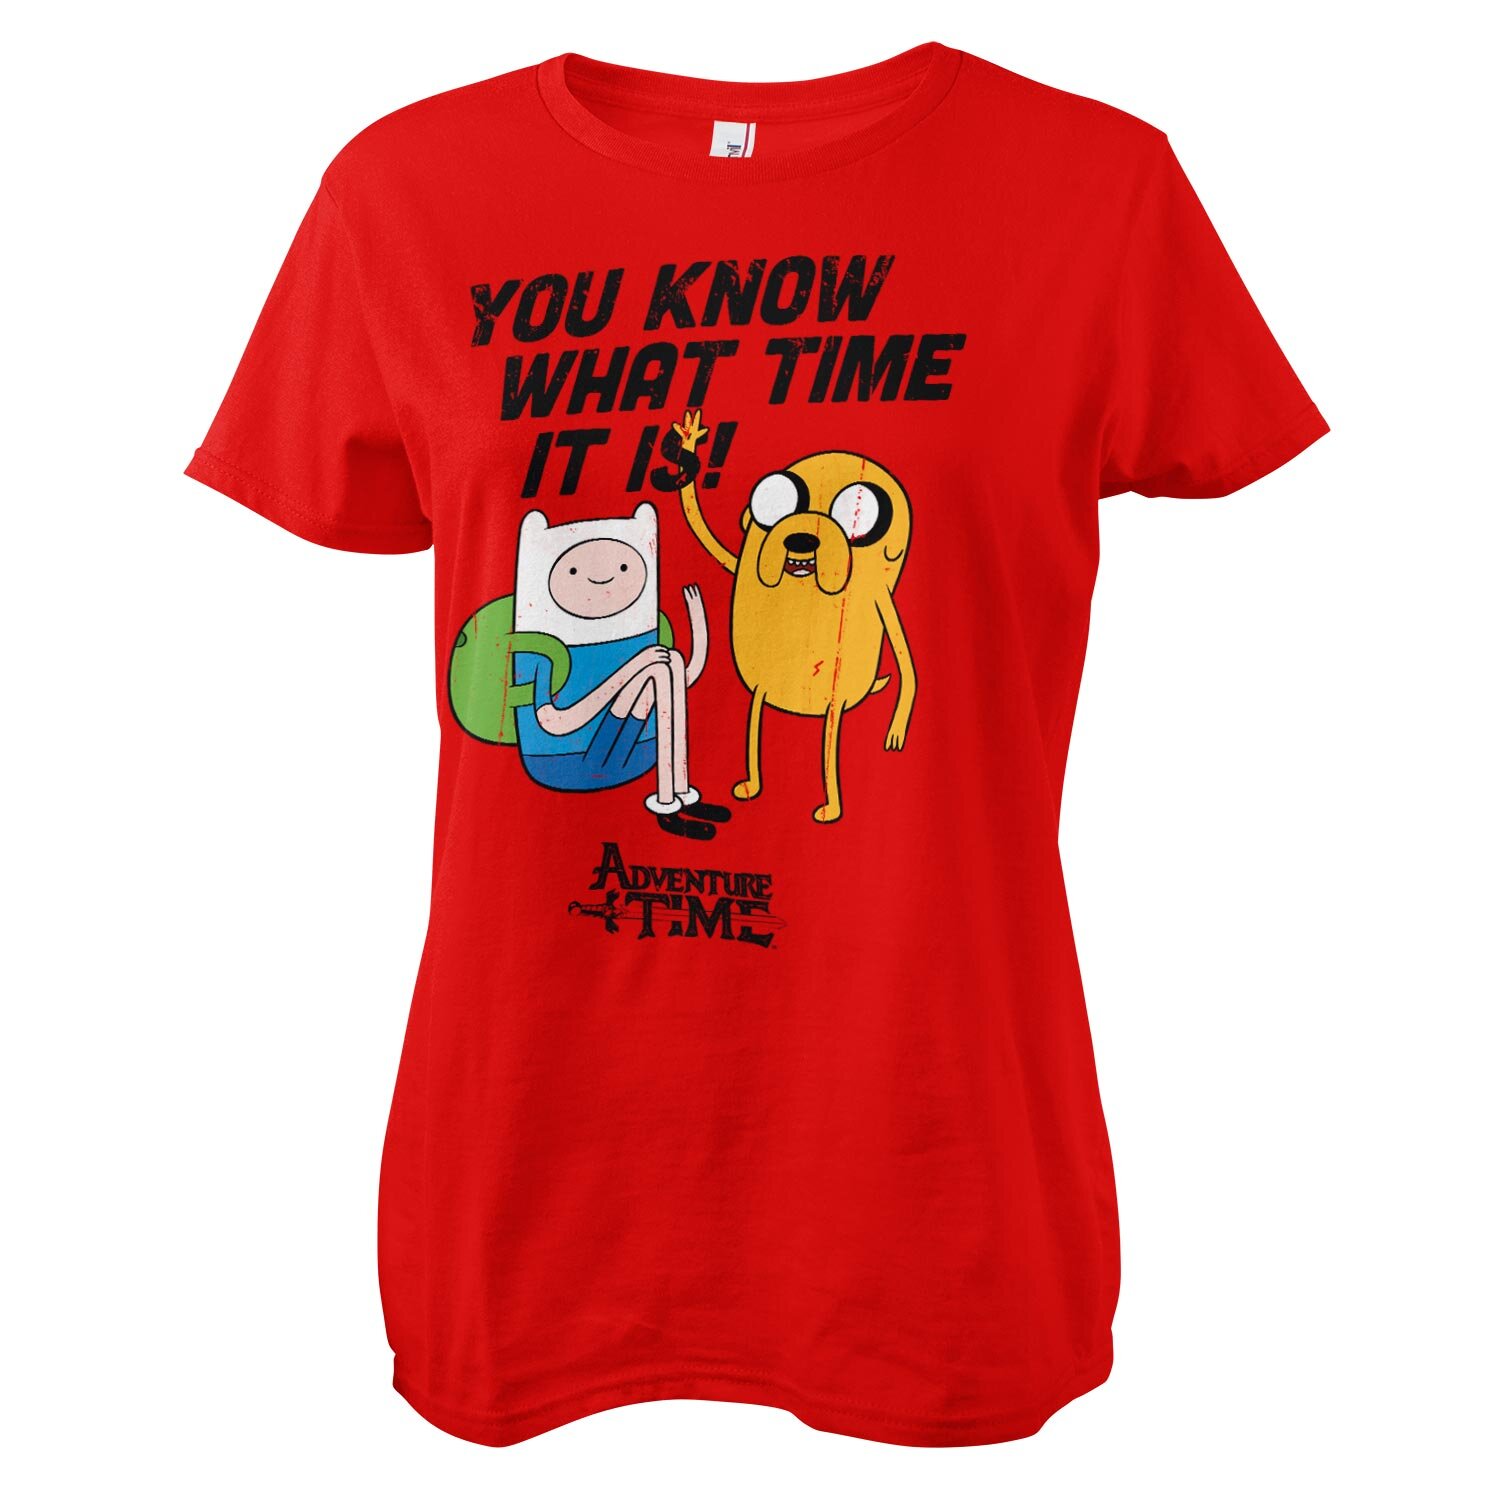 It's Adventure Time Girly Tee